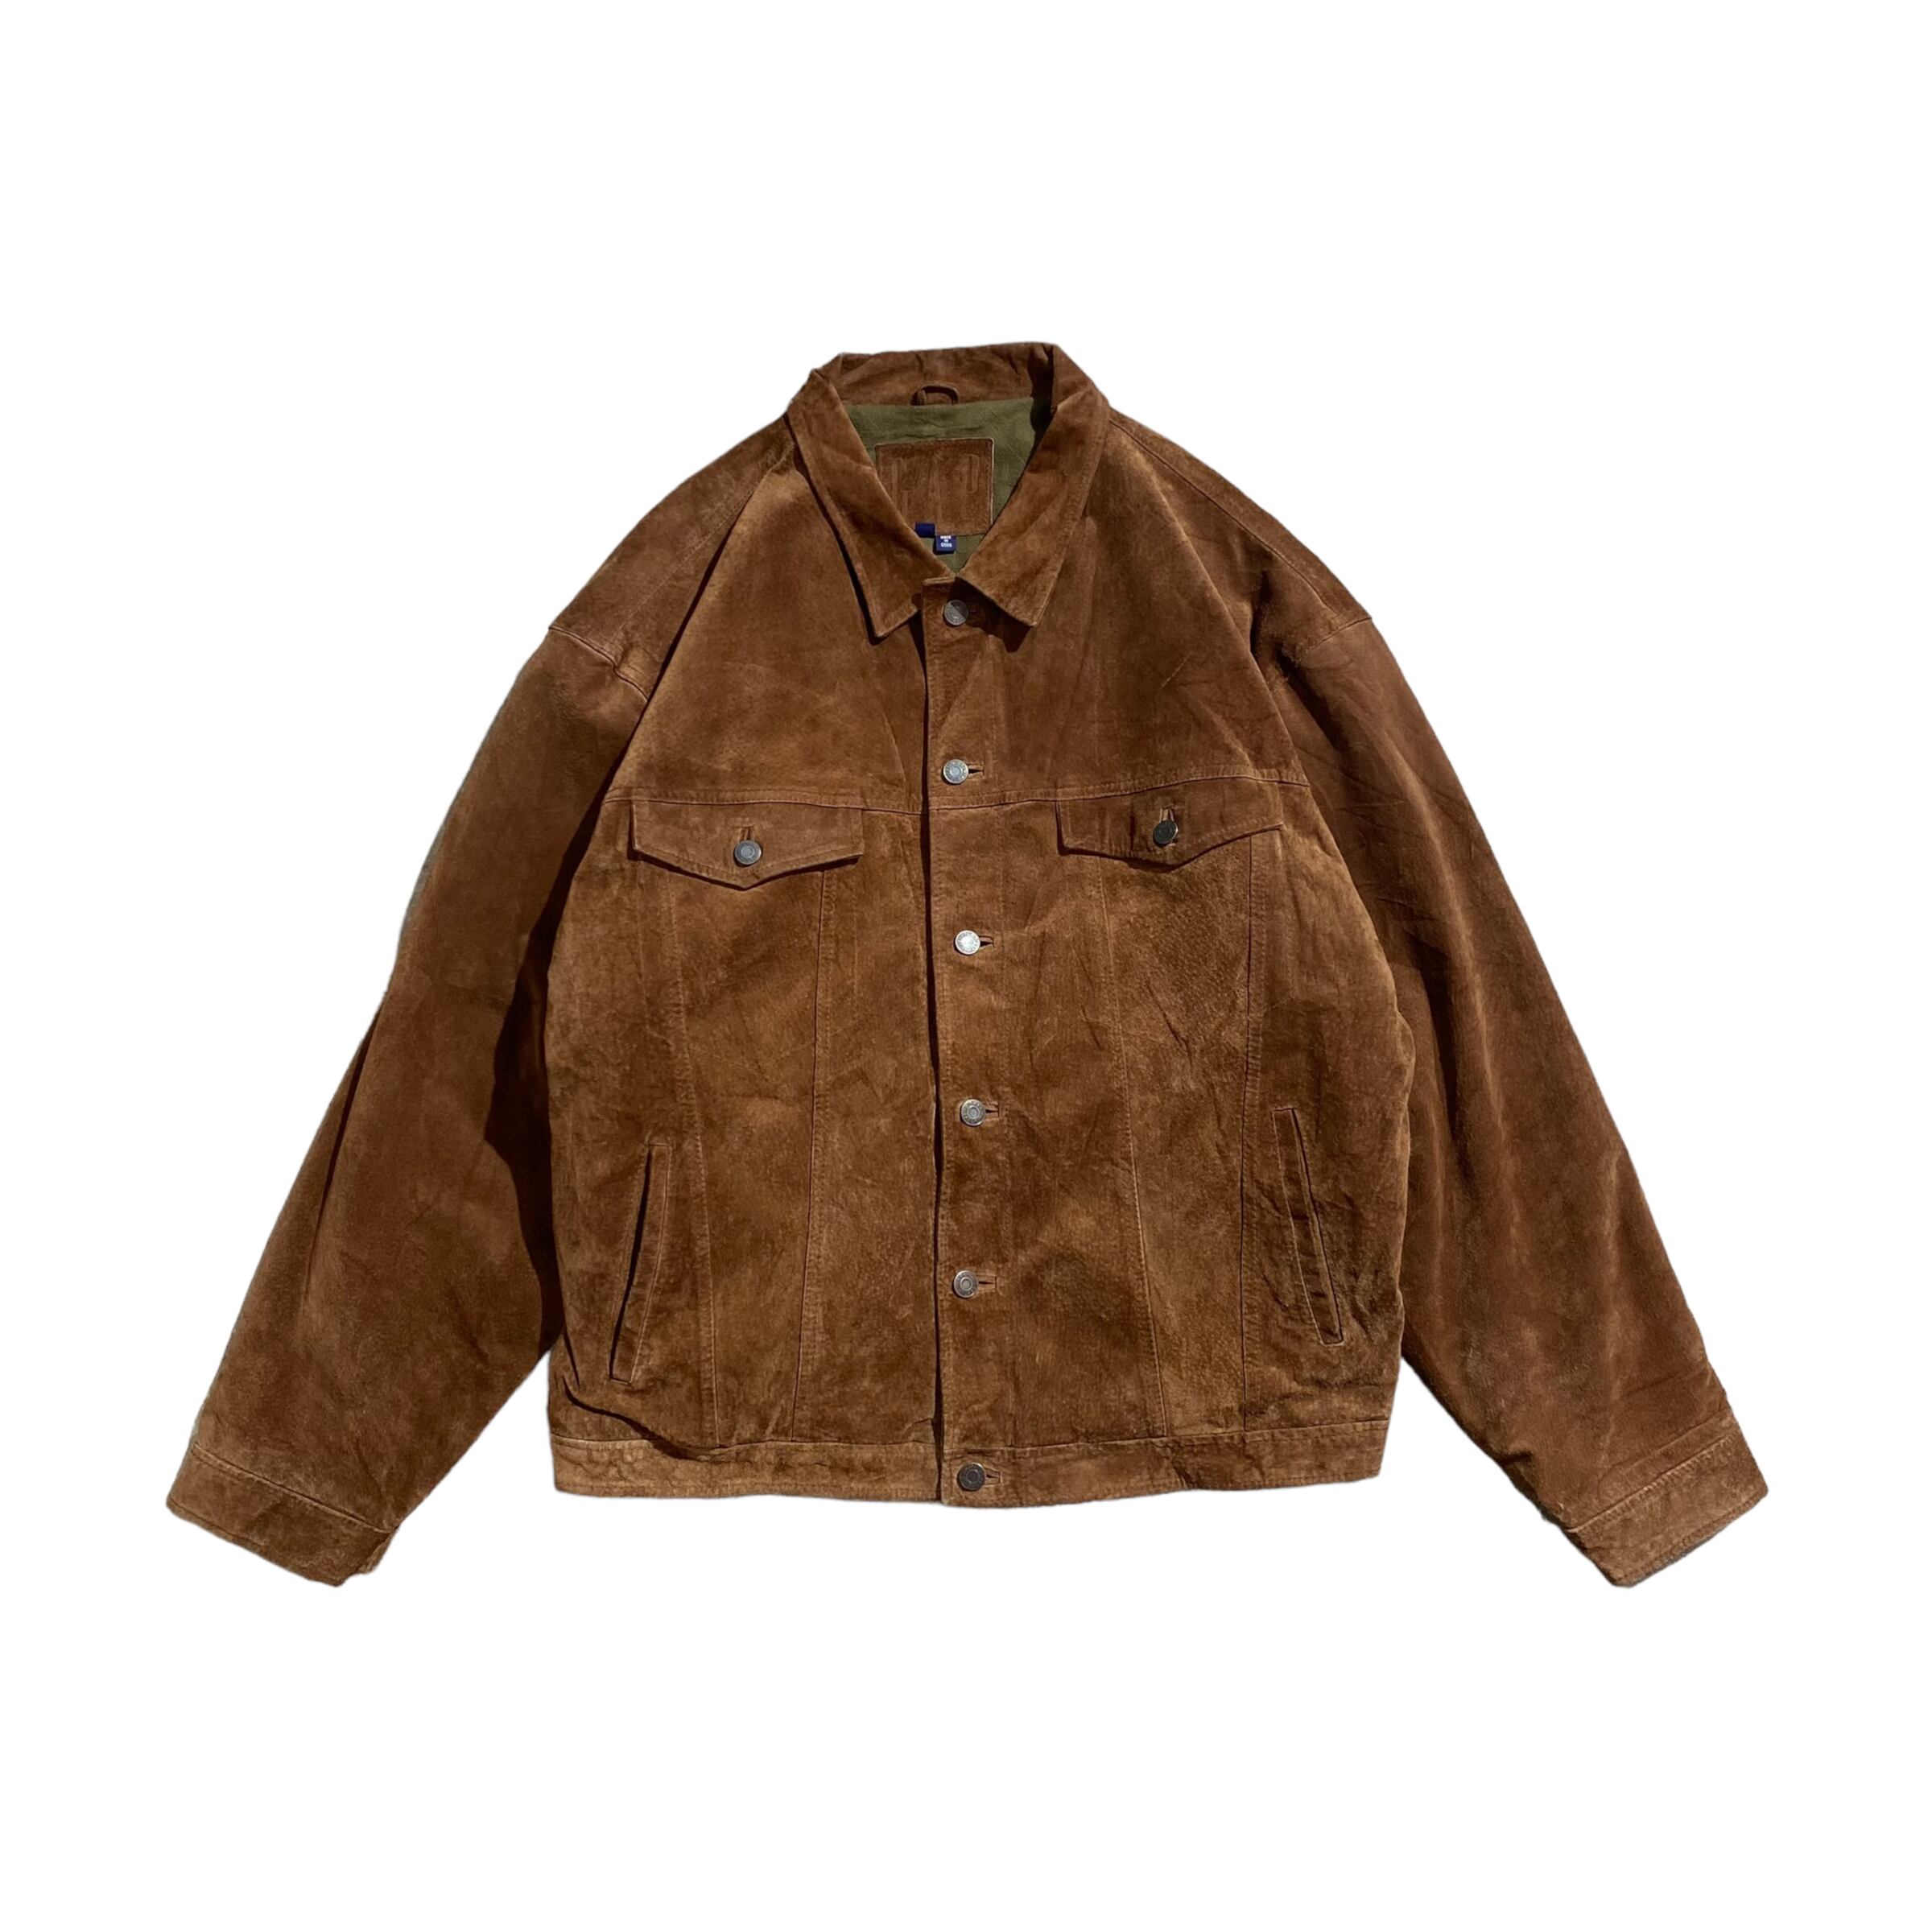 Old GAP suede leather jacket